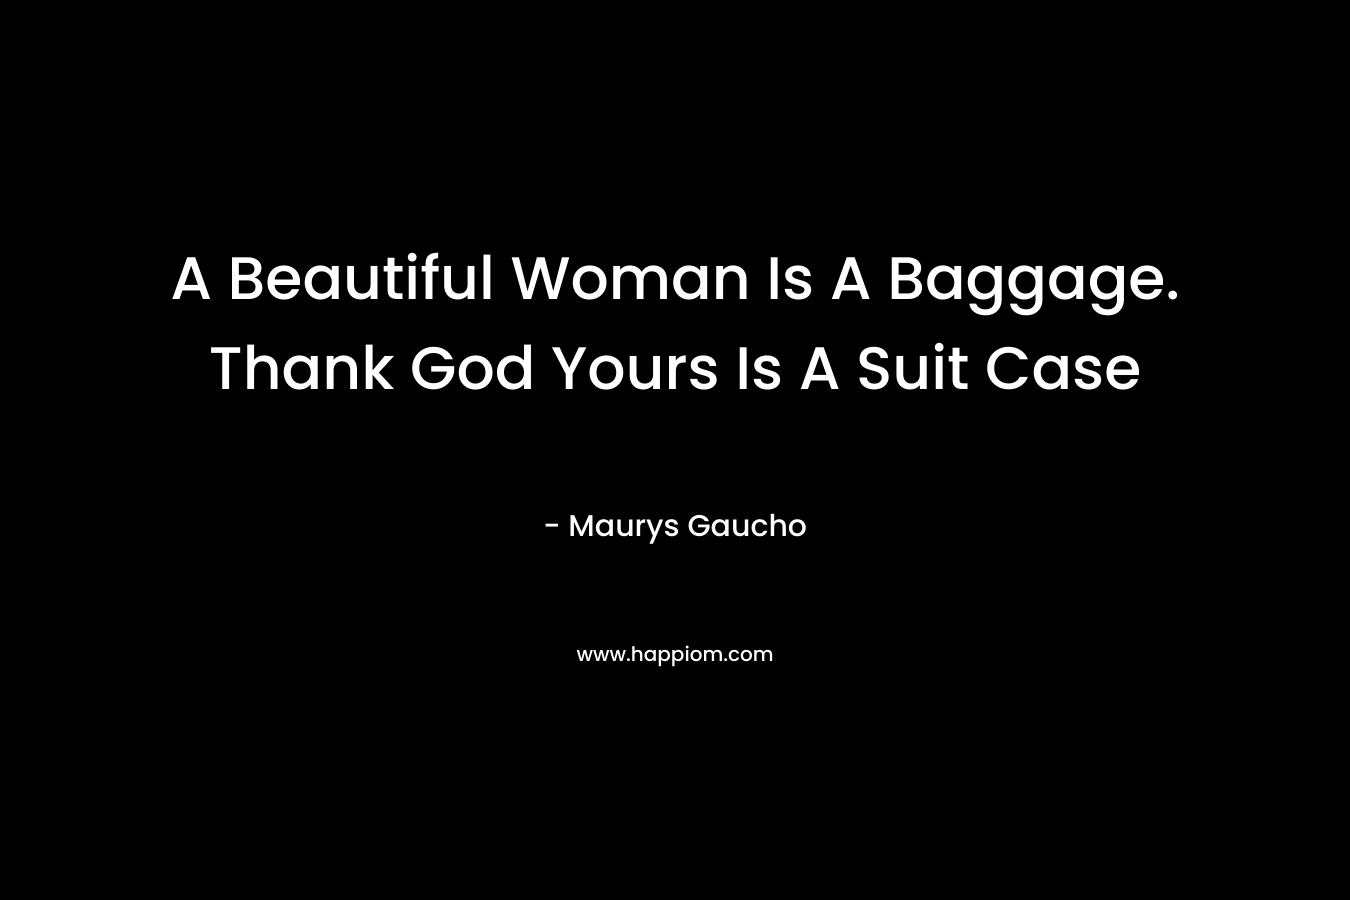 A Beautiful Woman Is A Baggage. Thank God Yours Is A Suit Case